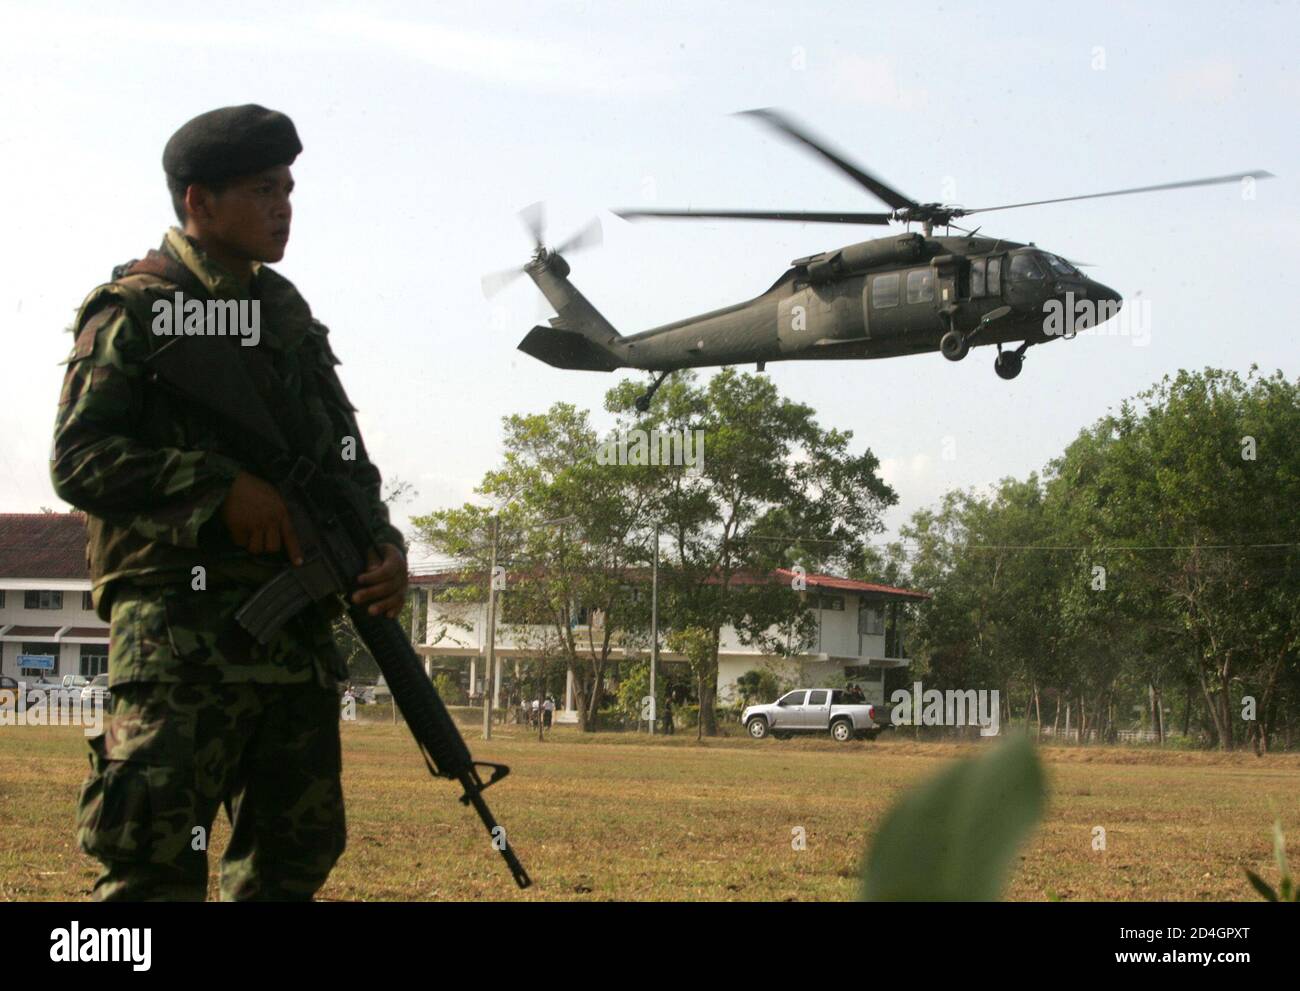 A soldier stands guard by a military helicopter, used to transport Prime Minister Thaksin Shinawatra during his two-day trip across the restive Muslim south in Yala province, 1,200 km (750 miles) south of Bangkok February 7, 2005. Shinawatra plan's to exclude Muslim villages from development aid if they help separatist militants, drew fierce criticism in the region. REUTERS/Sukree Sukplang  SS/LD Stock Photo